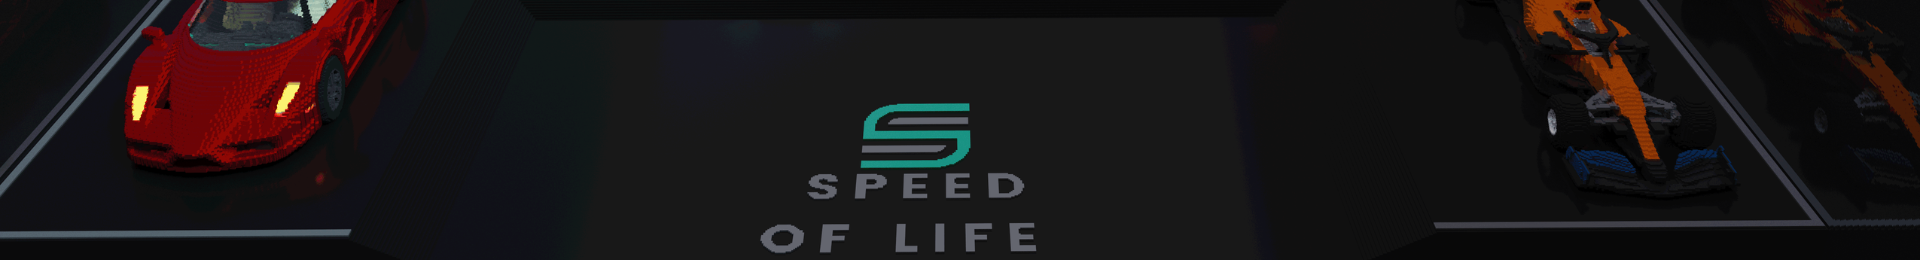 speed of life banner